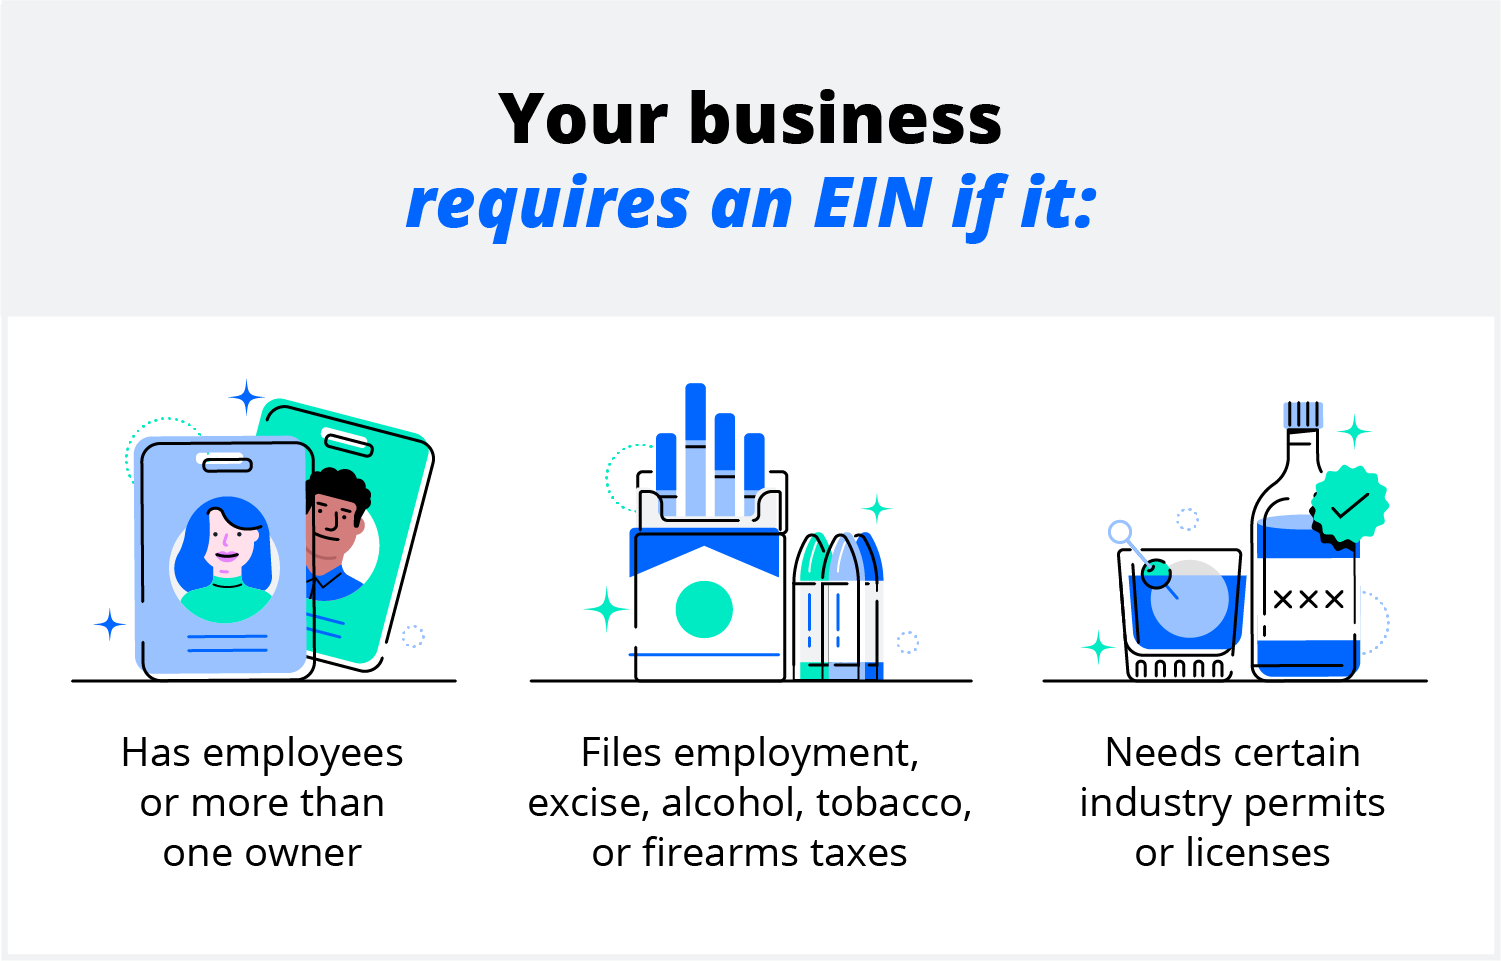 Your business requires an EIN if it: has employees or more than one owner; files employment, excise, alcohol, tobacco, or firearm taxes; needs certain industry permits or licenses.